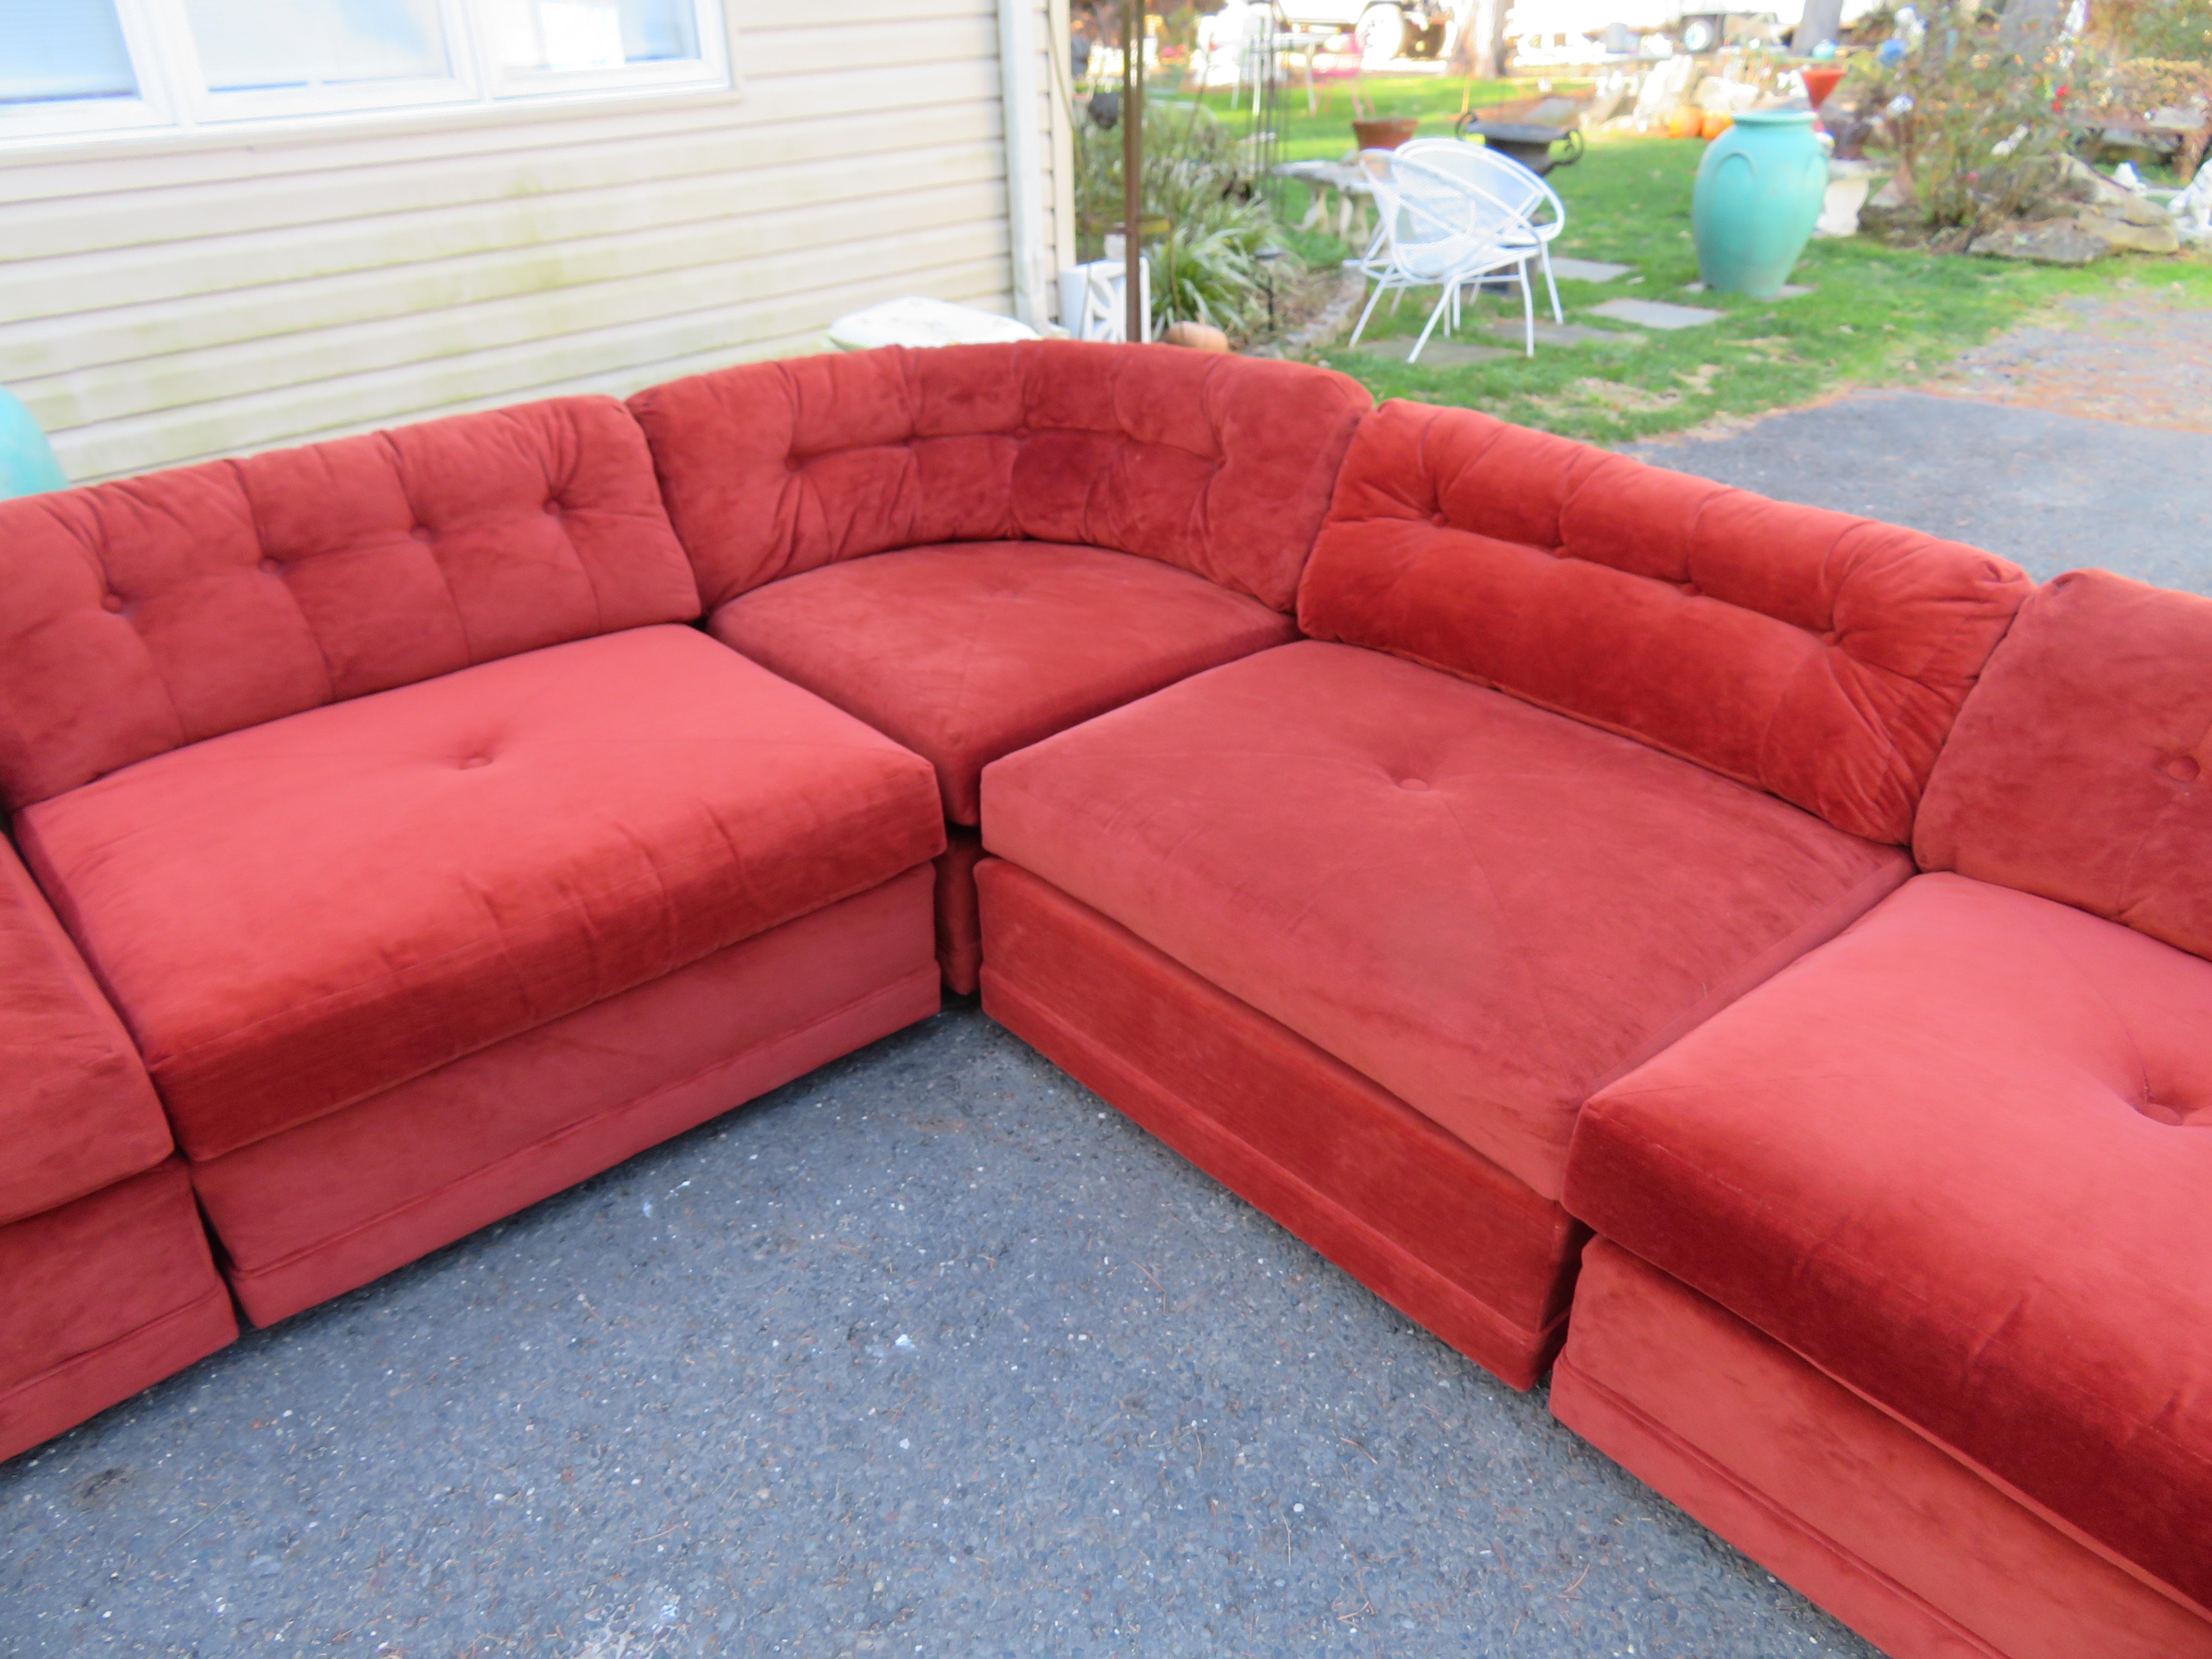 Magnificent 8 Piece Milo Baughman Style Curved Sectional Sofa Mid-Century Modern In Good Condition In Pemberton, NJ